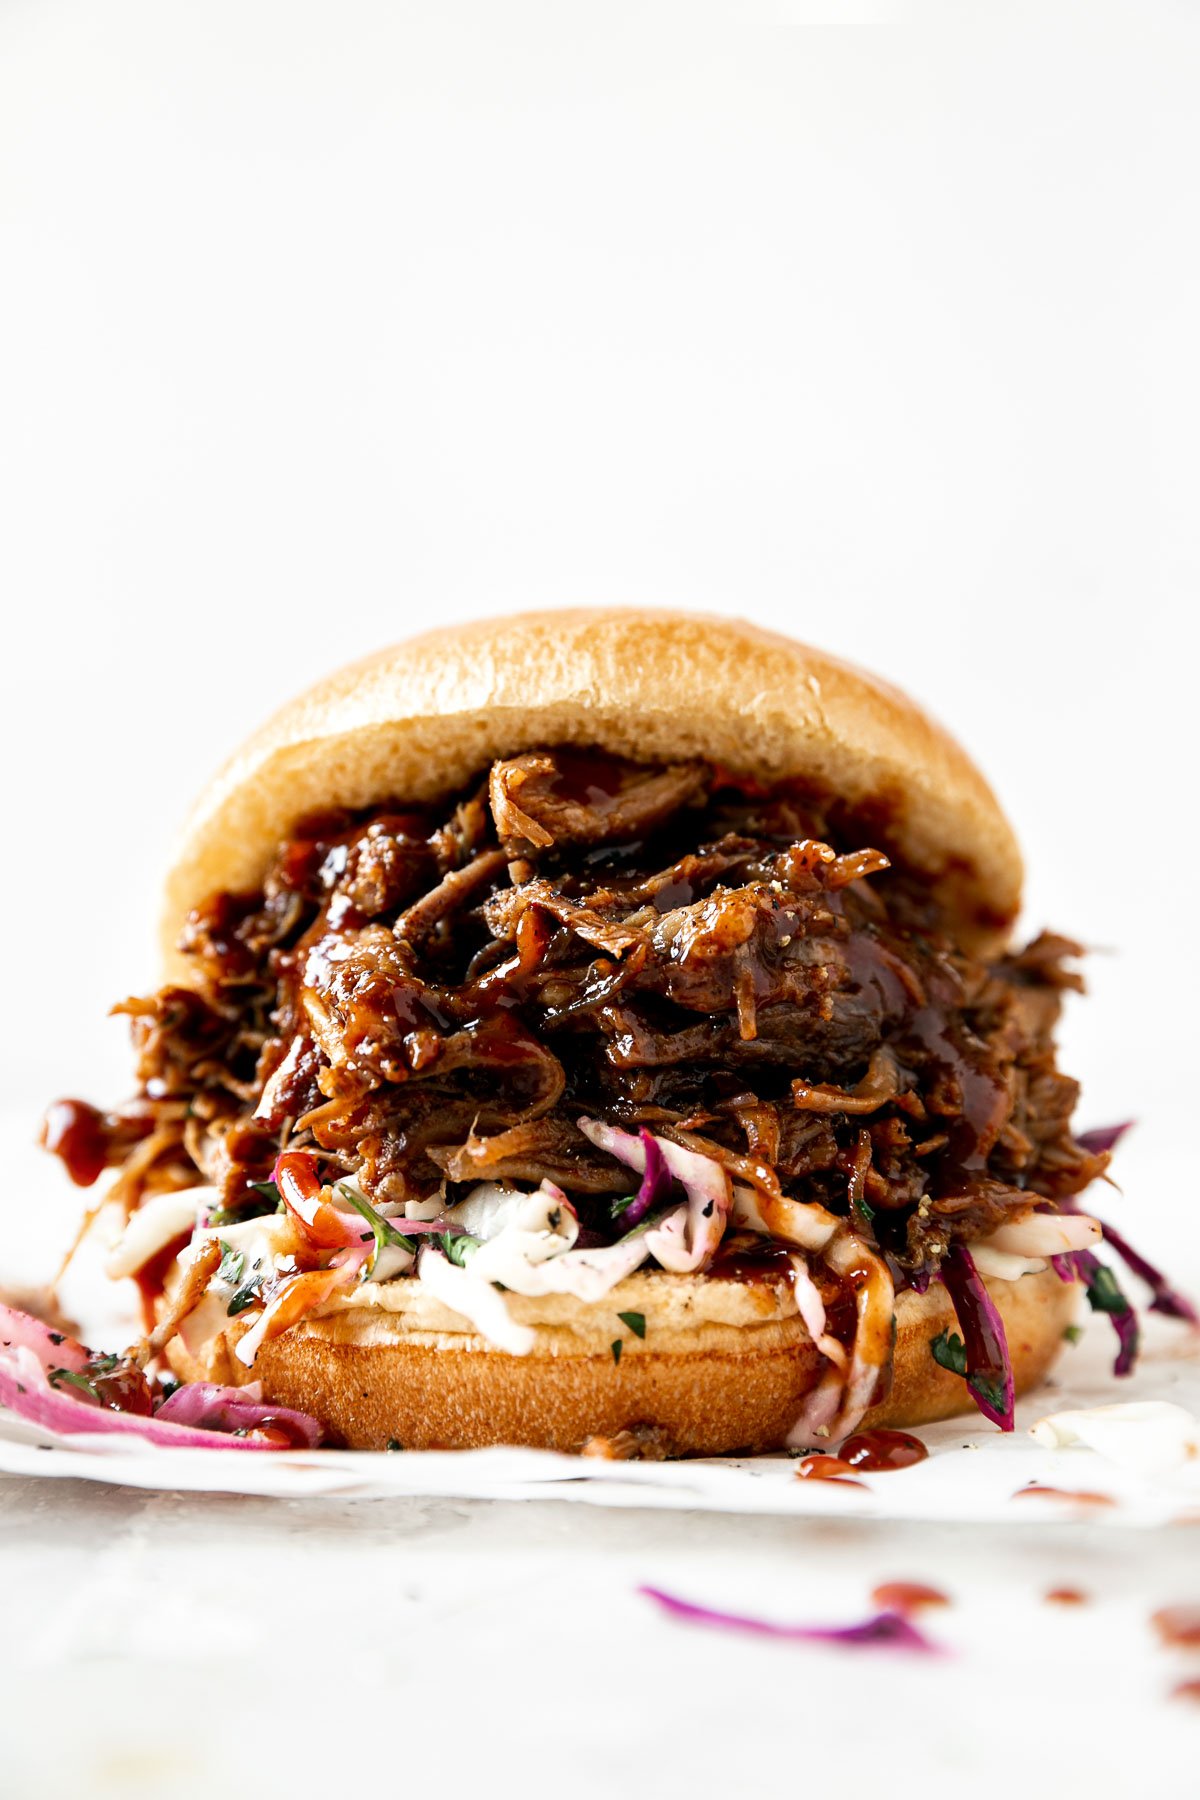 Which Meat church for Superbowl pulled pork? : r/smoking